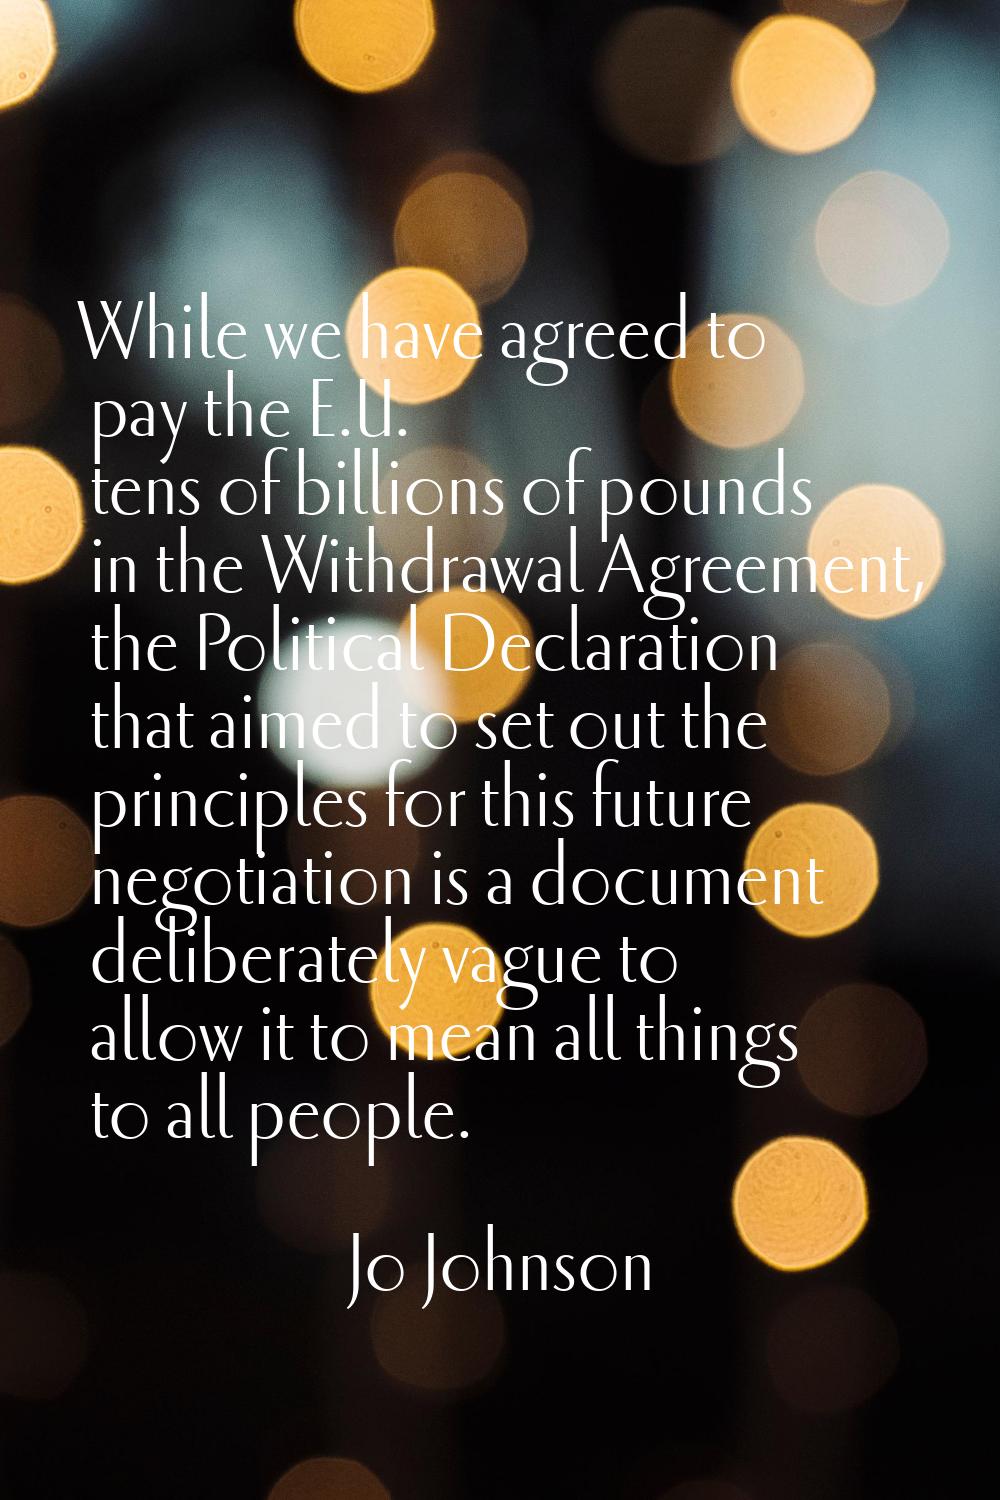 While we have agreed to pay the E.U. tens of billions of pounds in the Withdrawal Agreement, the Po